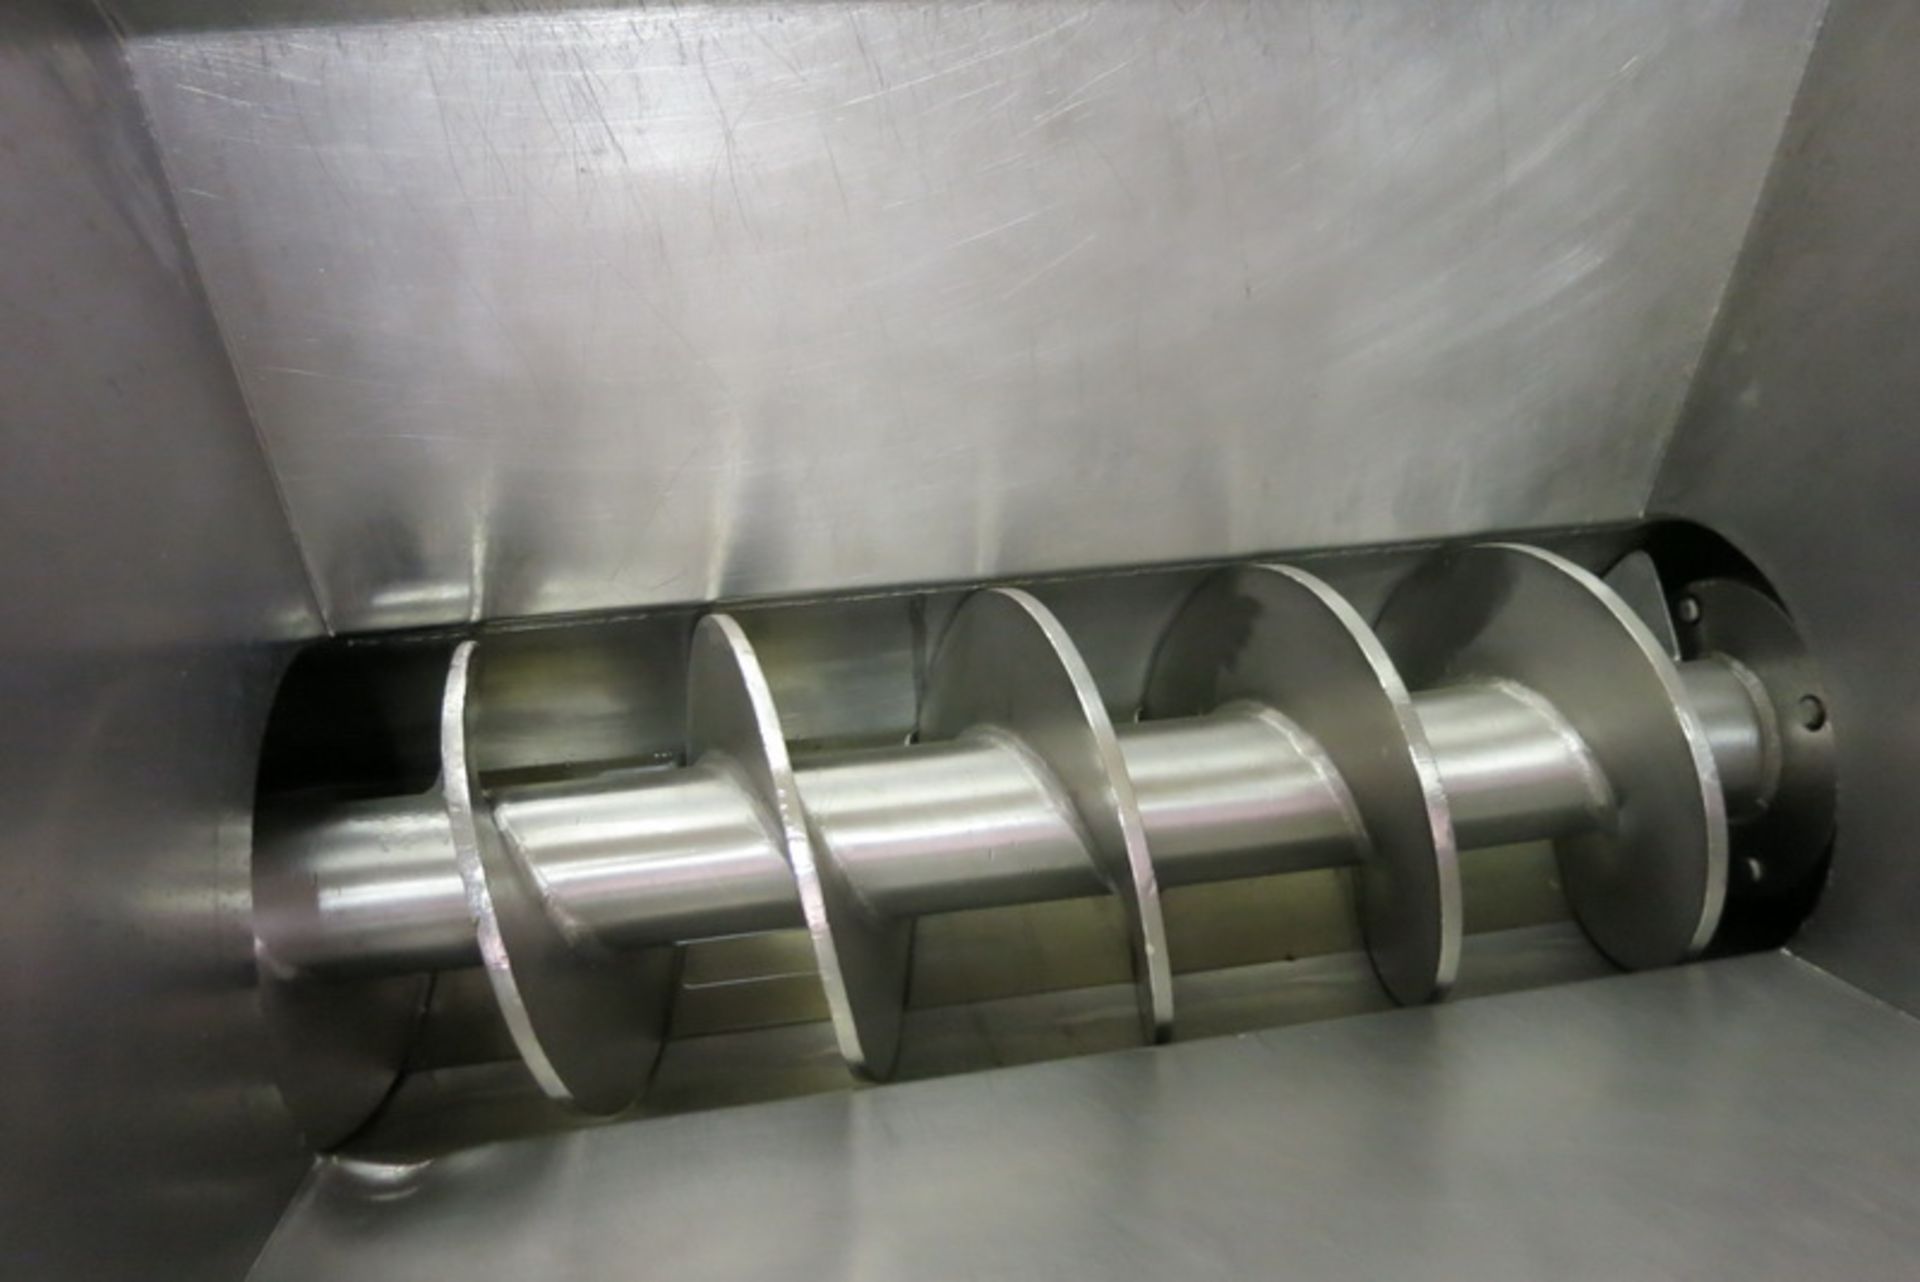 Cheese extruding machine, stainless, with 8” dia. auger with attachment, drive motor, onboard - Image 2 of 3